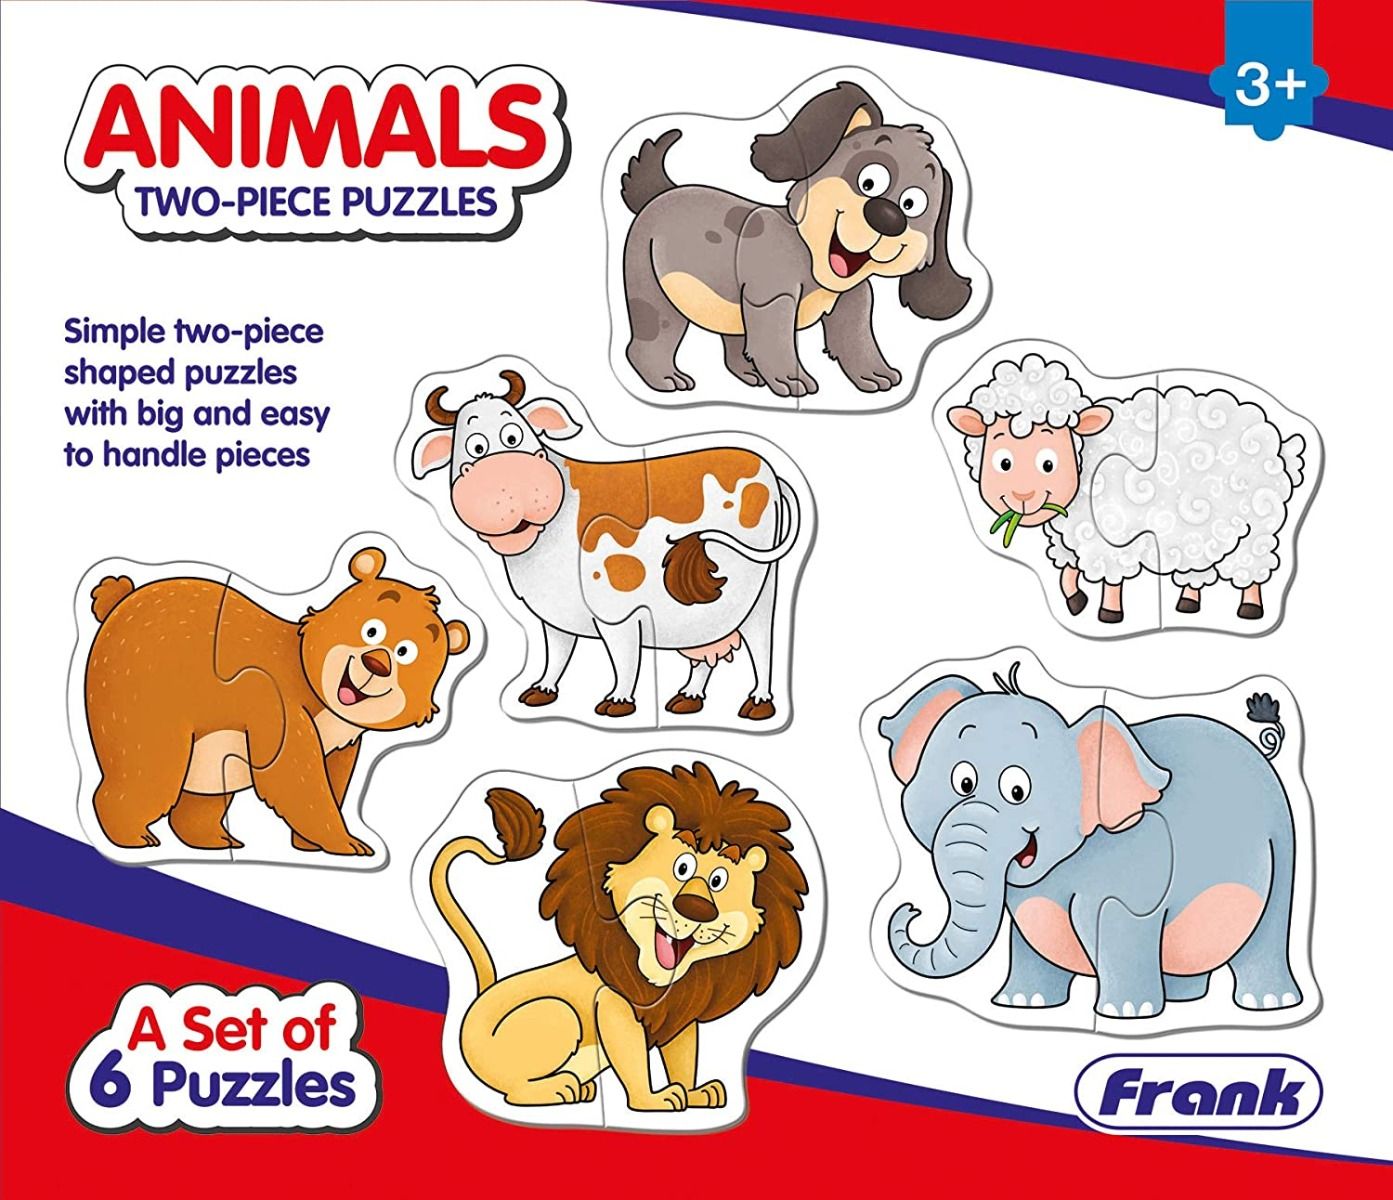 Frank Animals Puzzles - A Set of 6 Two-Piece Shaped Jigsaw Puzzles (12 Pcs)